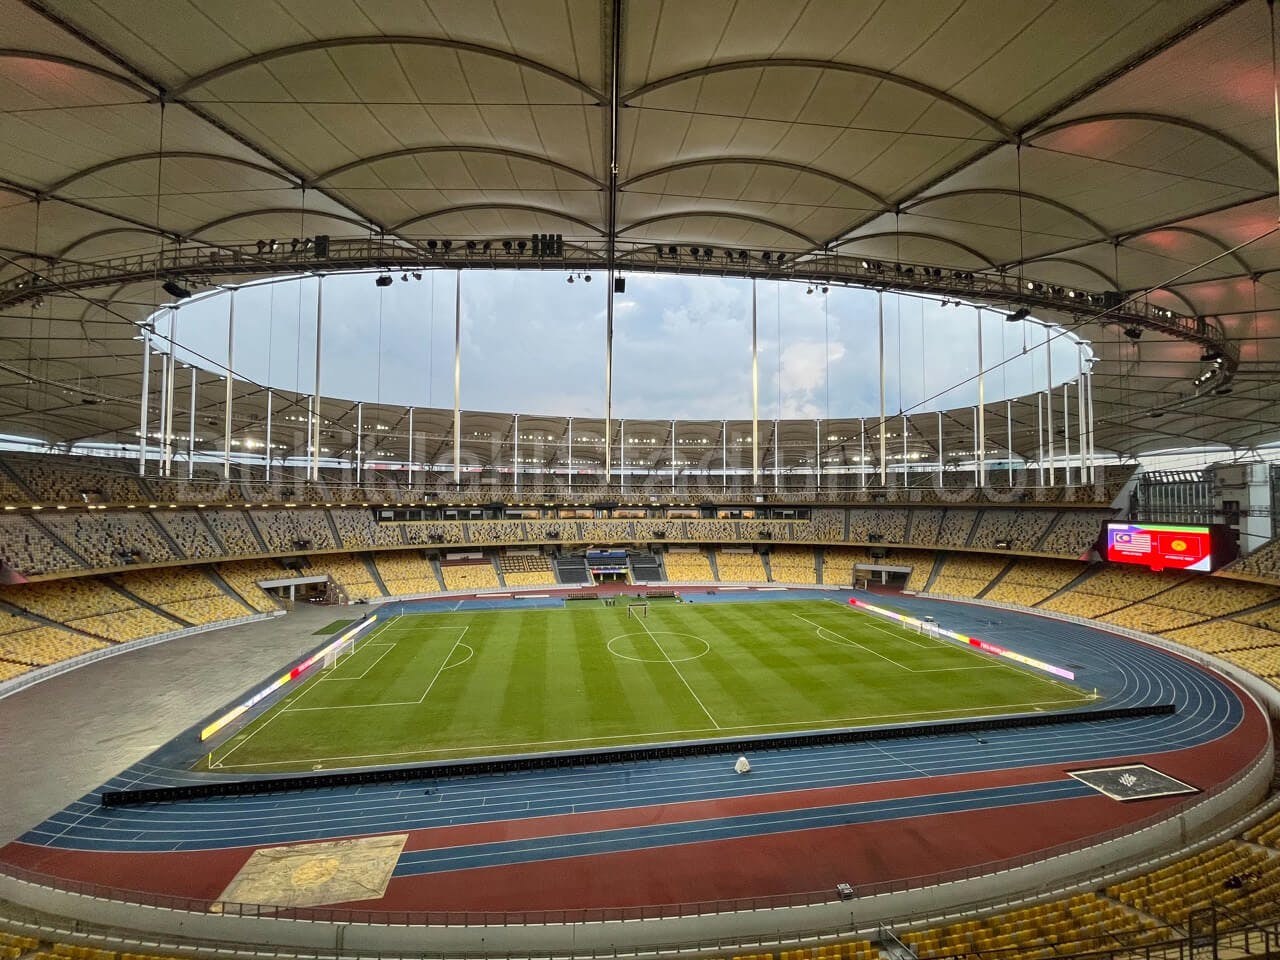 0.5x View of Bukit Jalil field from section 315 of Stadium Bukit Jalil.